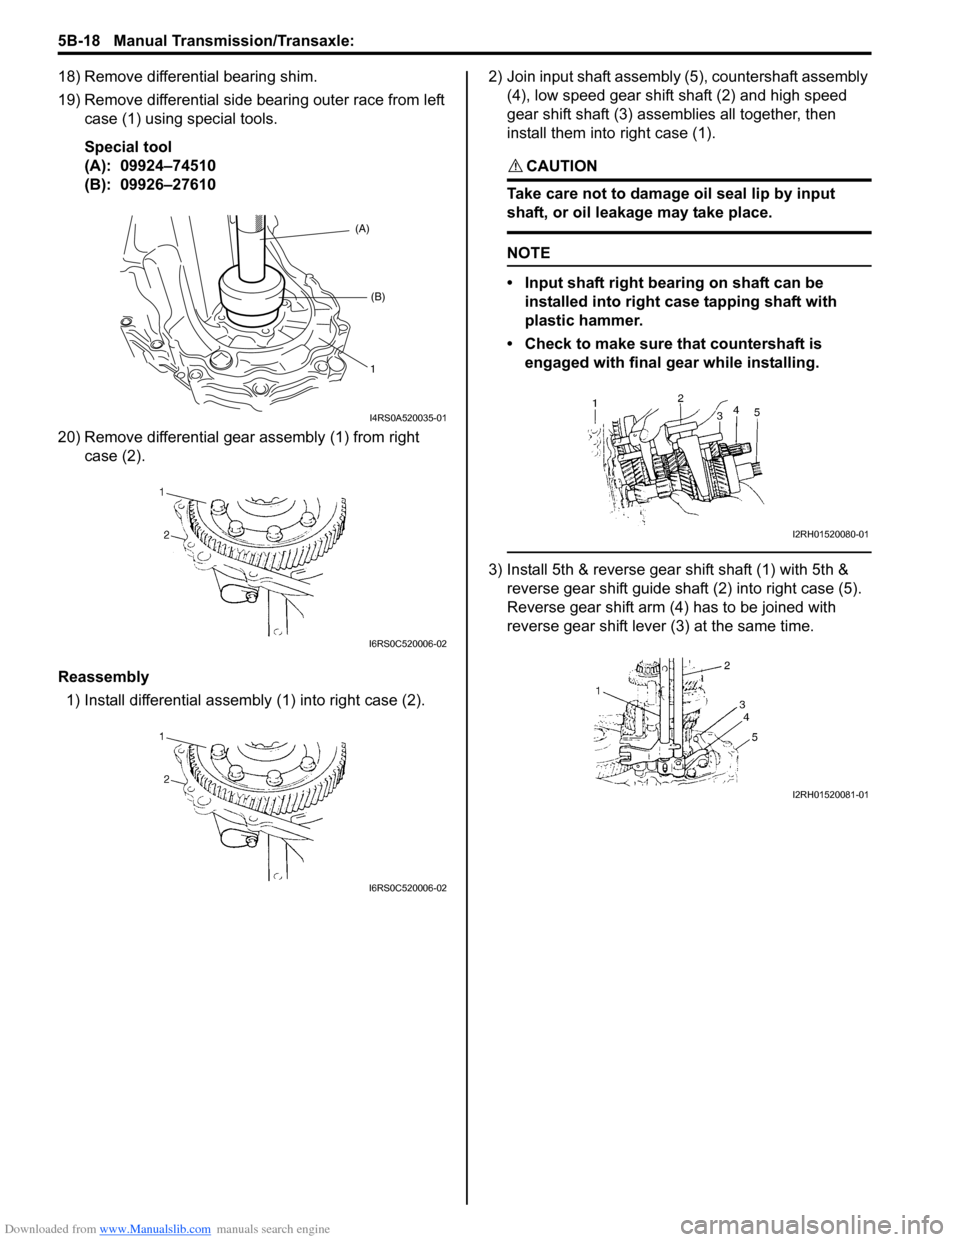 SUZUKI SWIFT 2006 2.G Service User Guide Downloaded from www.Manualslib.com manuals search engine 5B-18 Manual Transmission/Transaxle: 
18) Remove differential bearing shim.
19) Remove differential side bearing outer race from left case (1) 